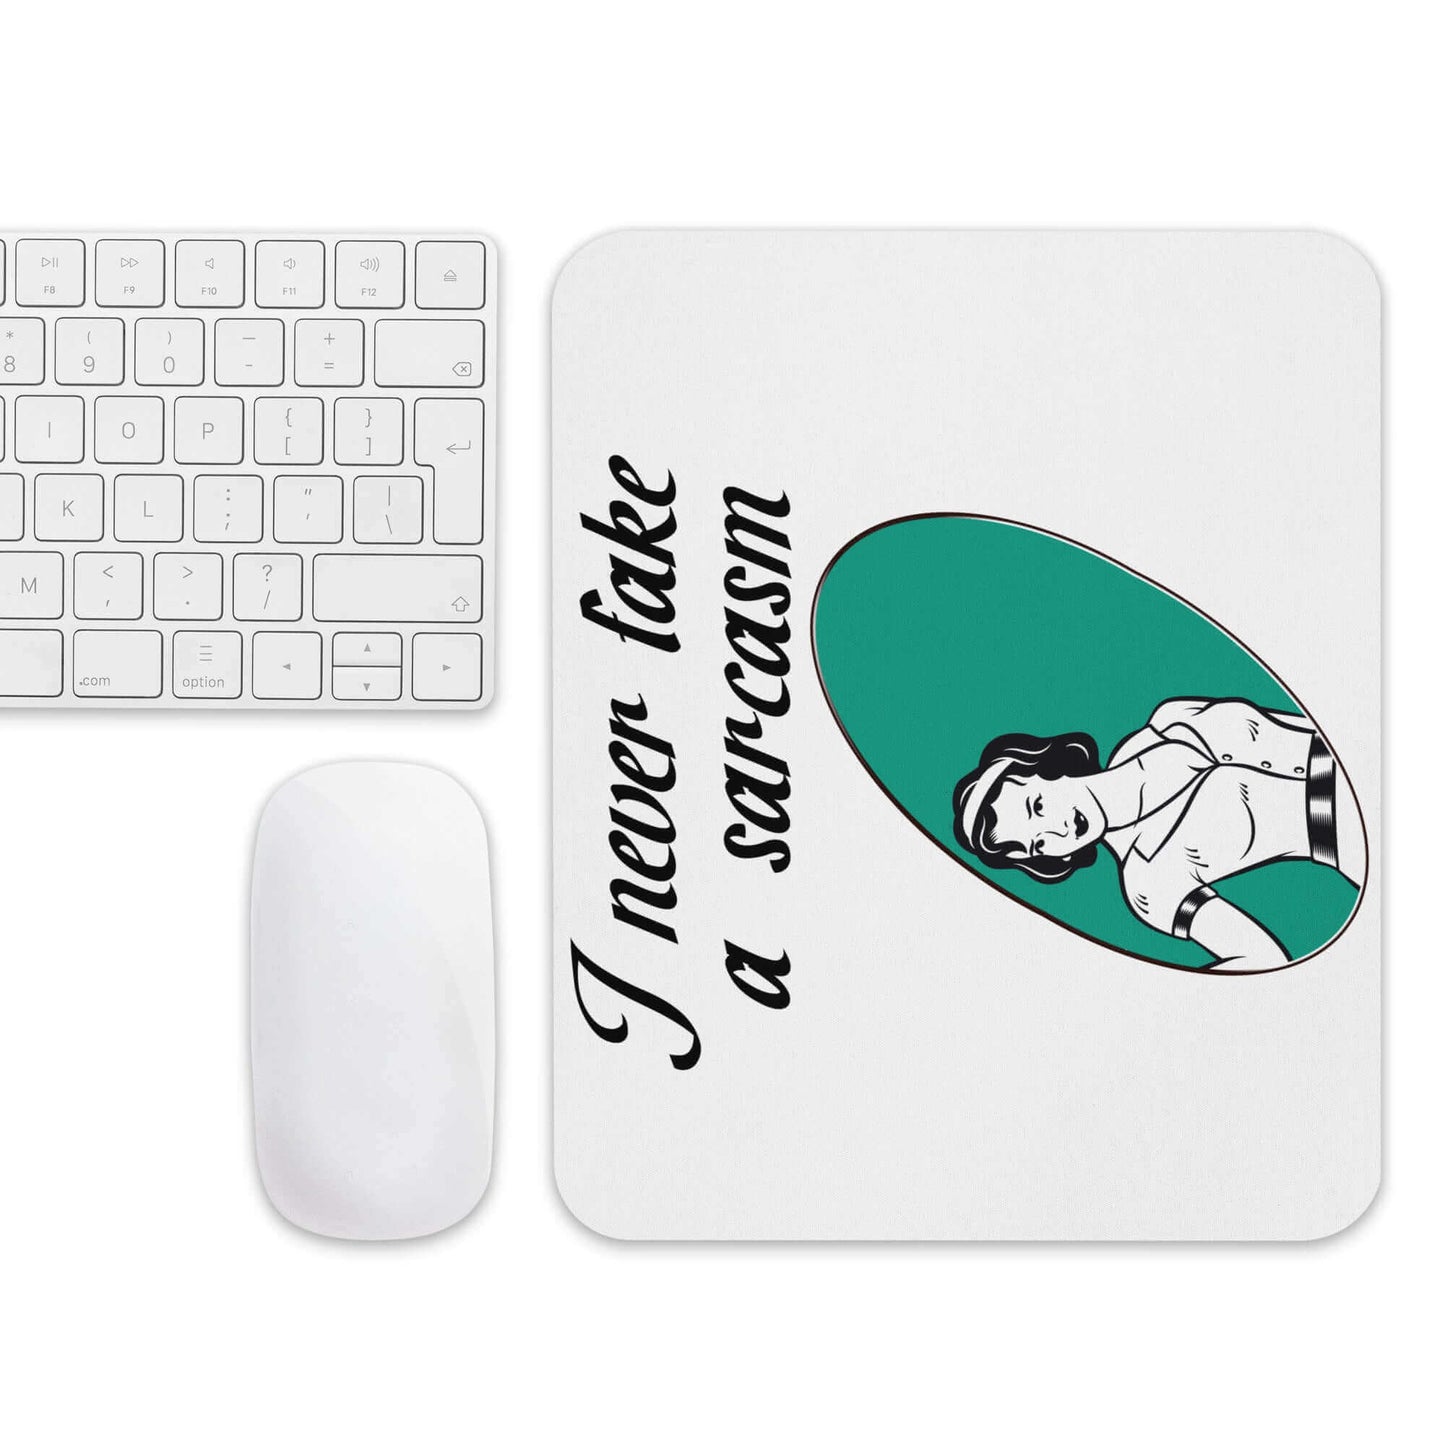 I NEVER fake a sarcasm - Mouse pad - Horrible Designs